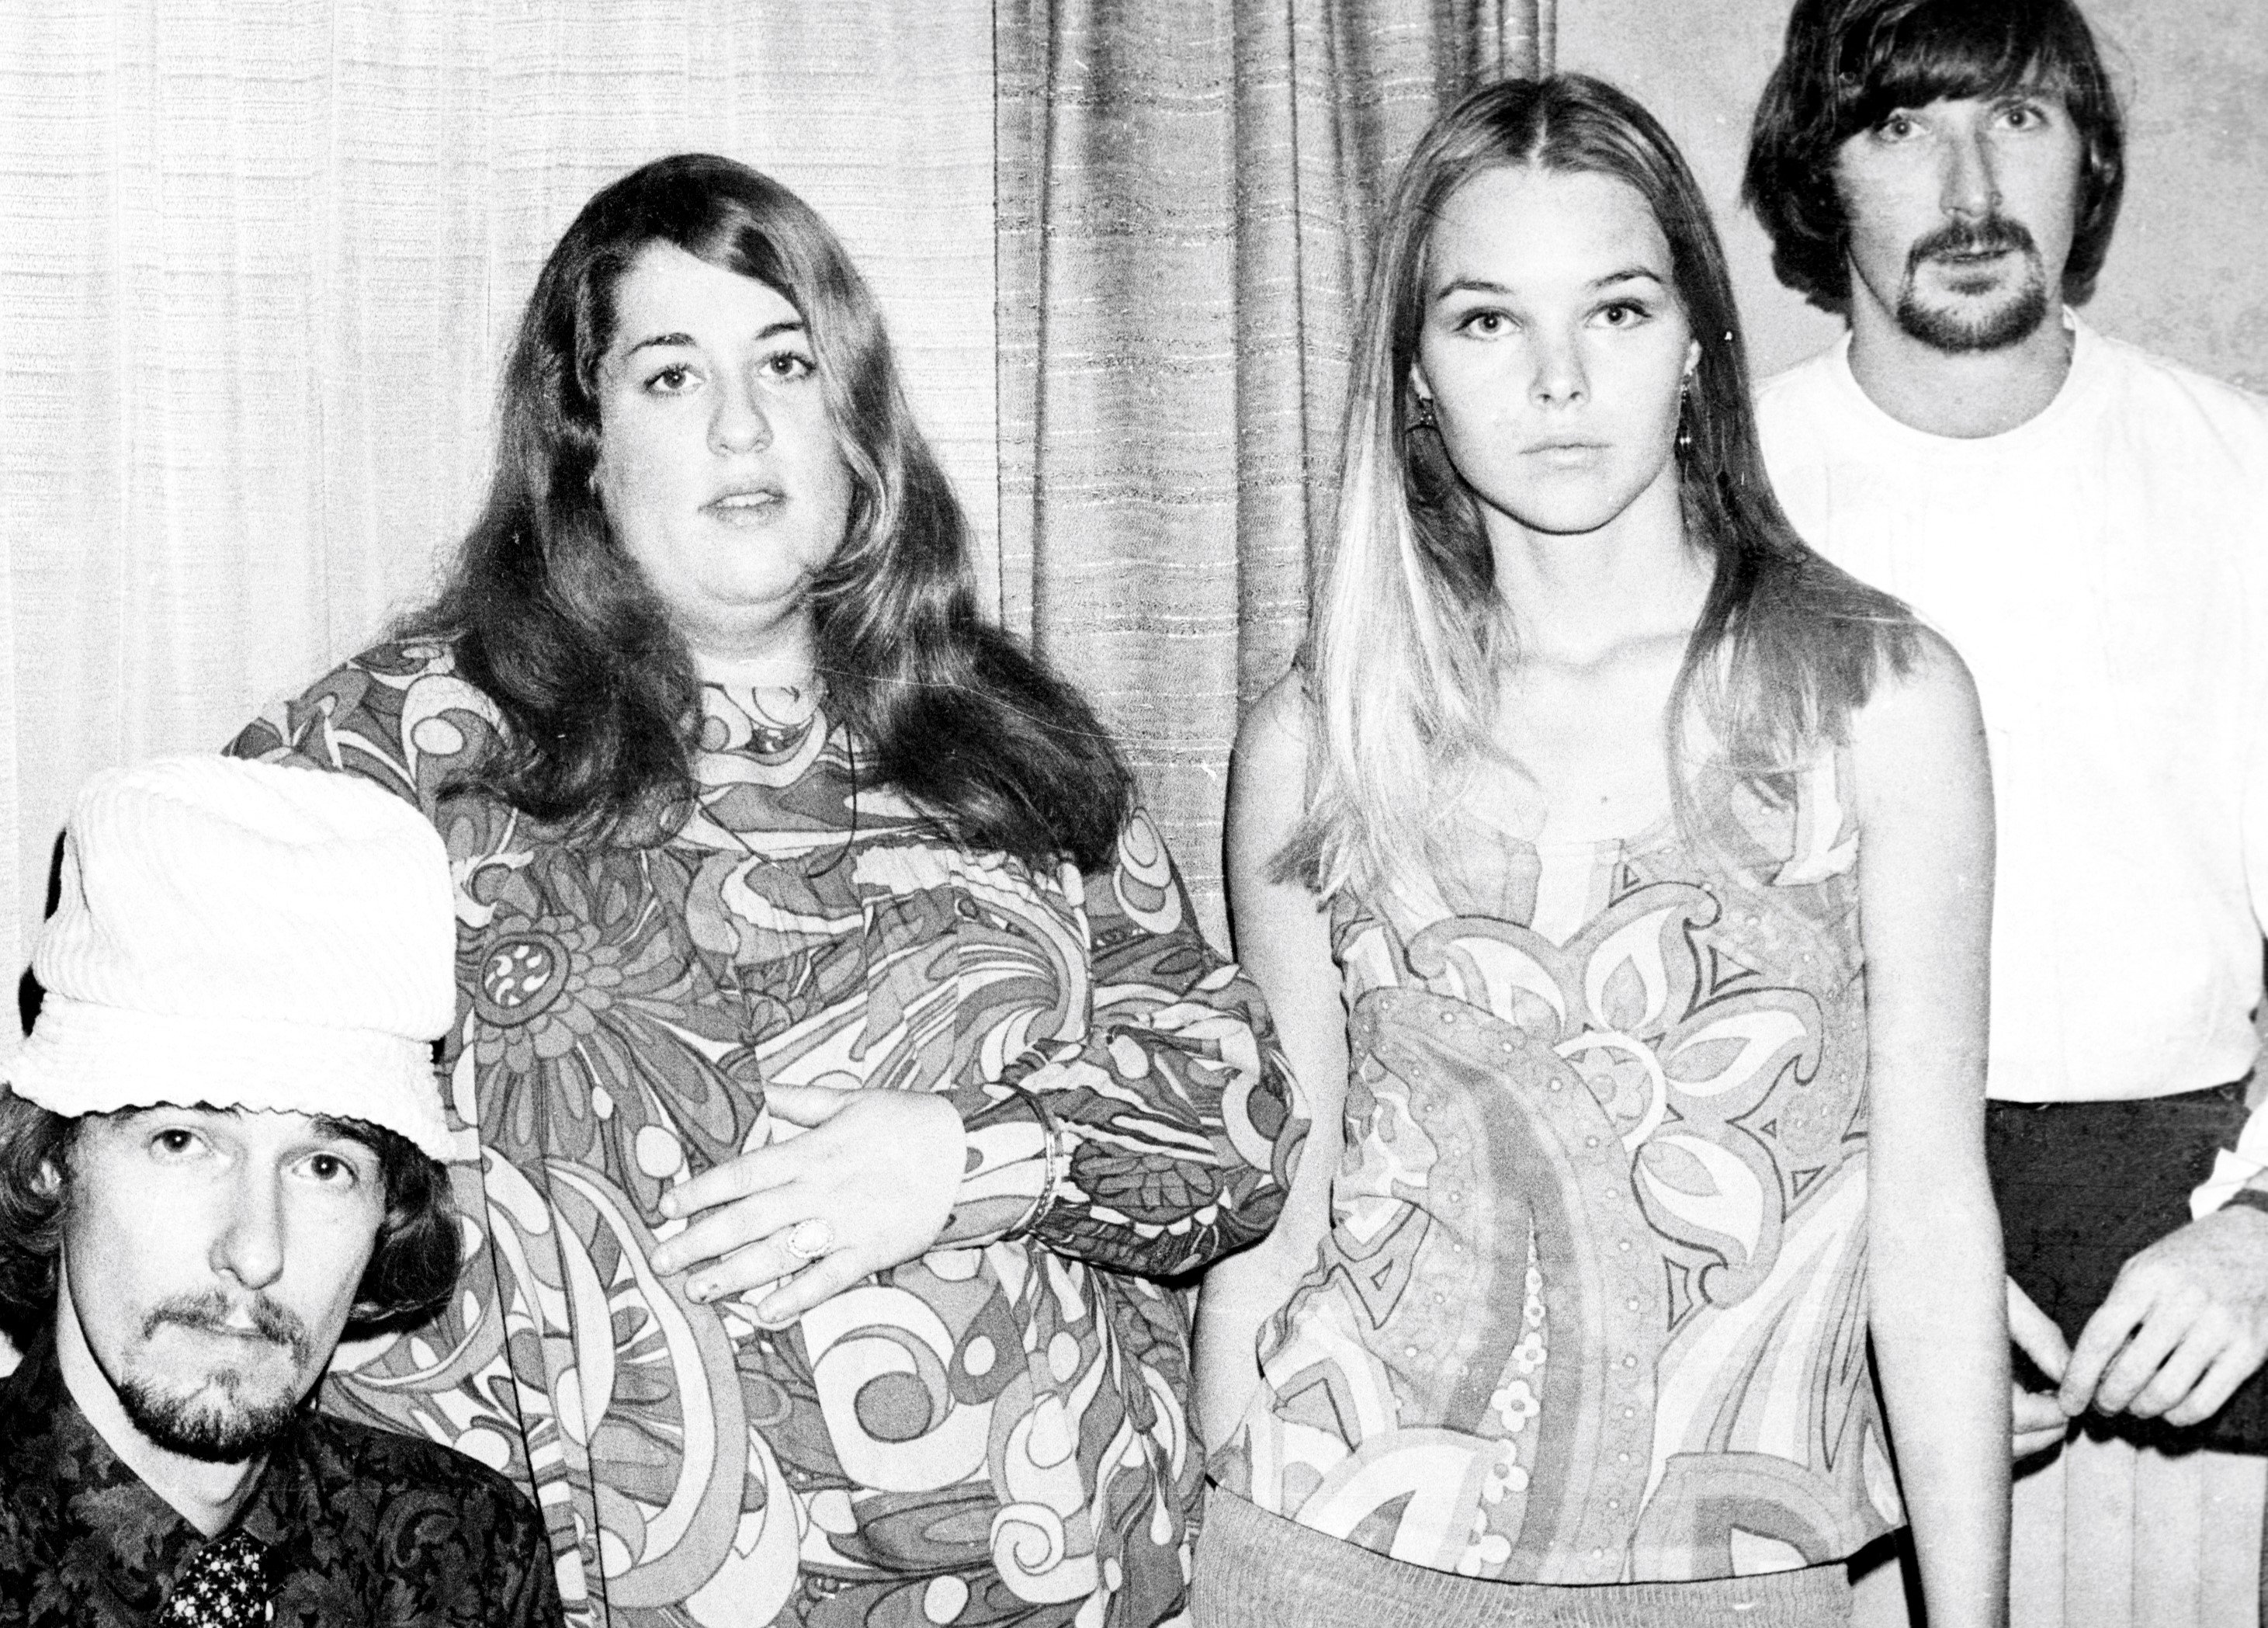 The Beatles’ ‘Love Me Do’ Didn’t Sound ‘Proper’ to The Mamas & the Papas’ Michelle Phillips